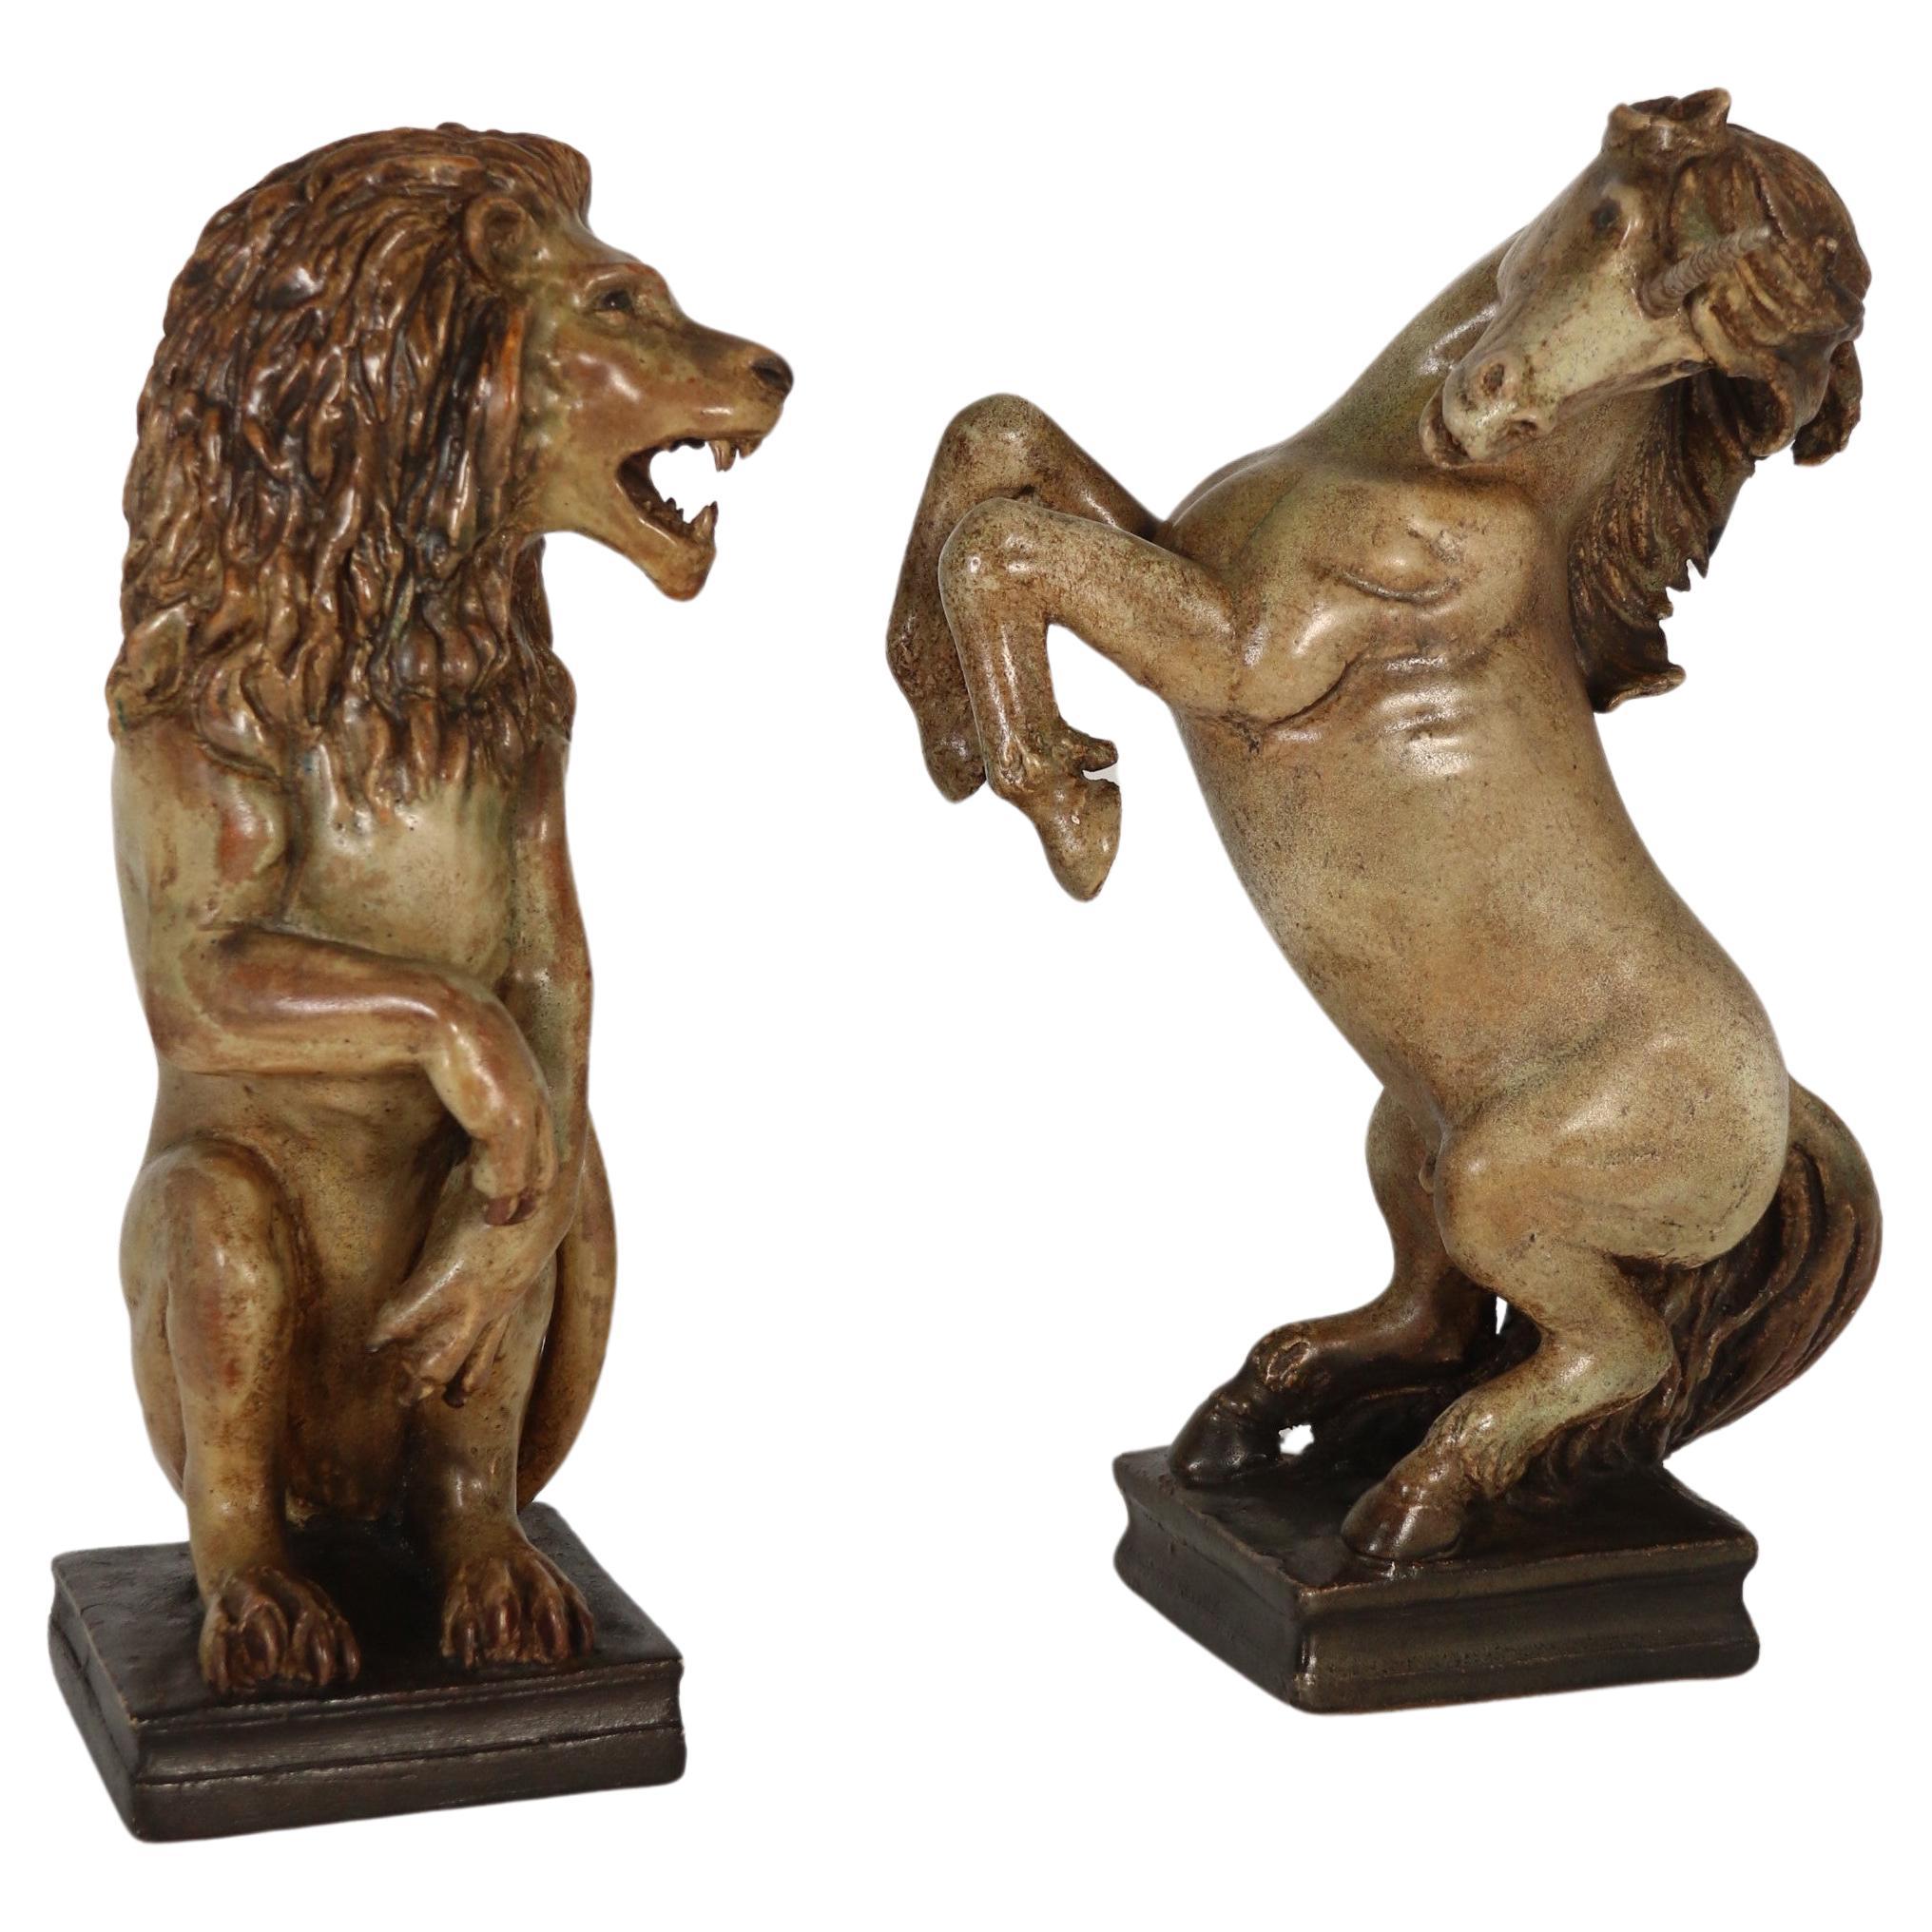 A pair of art pottery hand sculpted figures of a heraldic lion and unicorn.